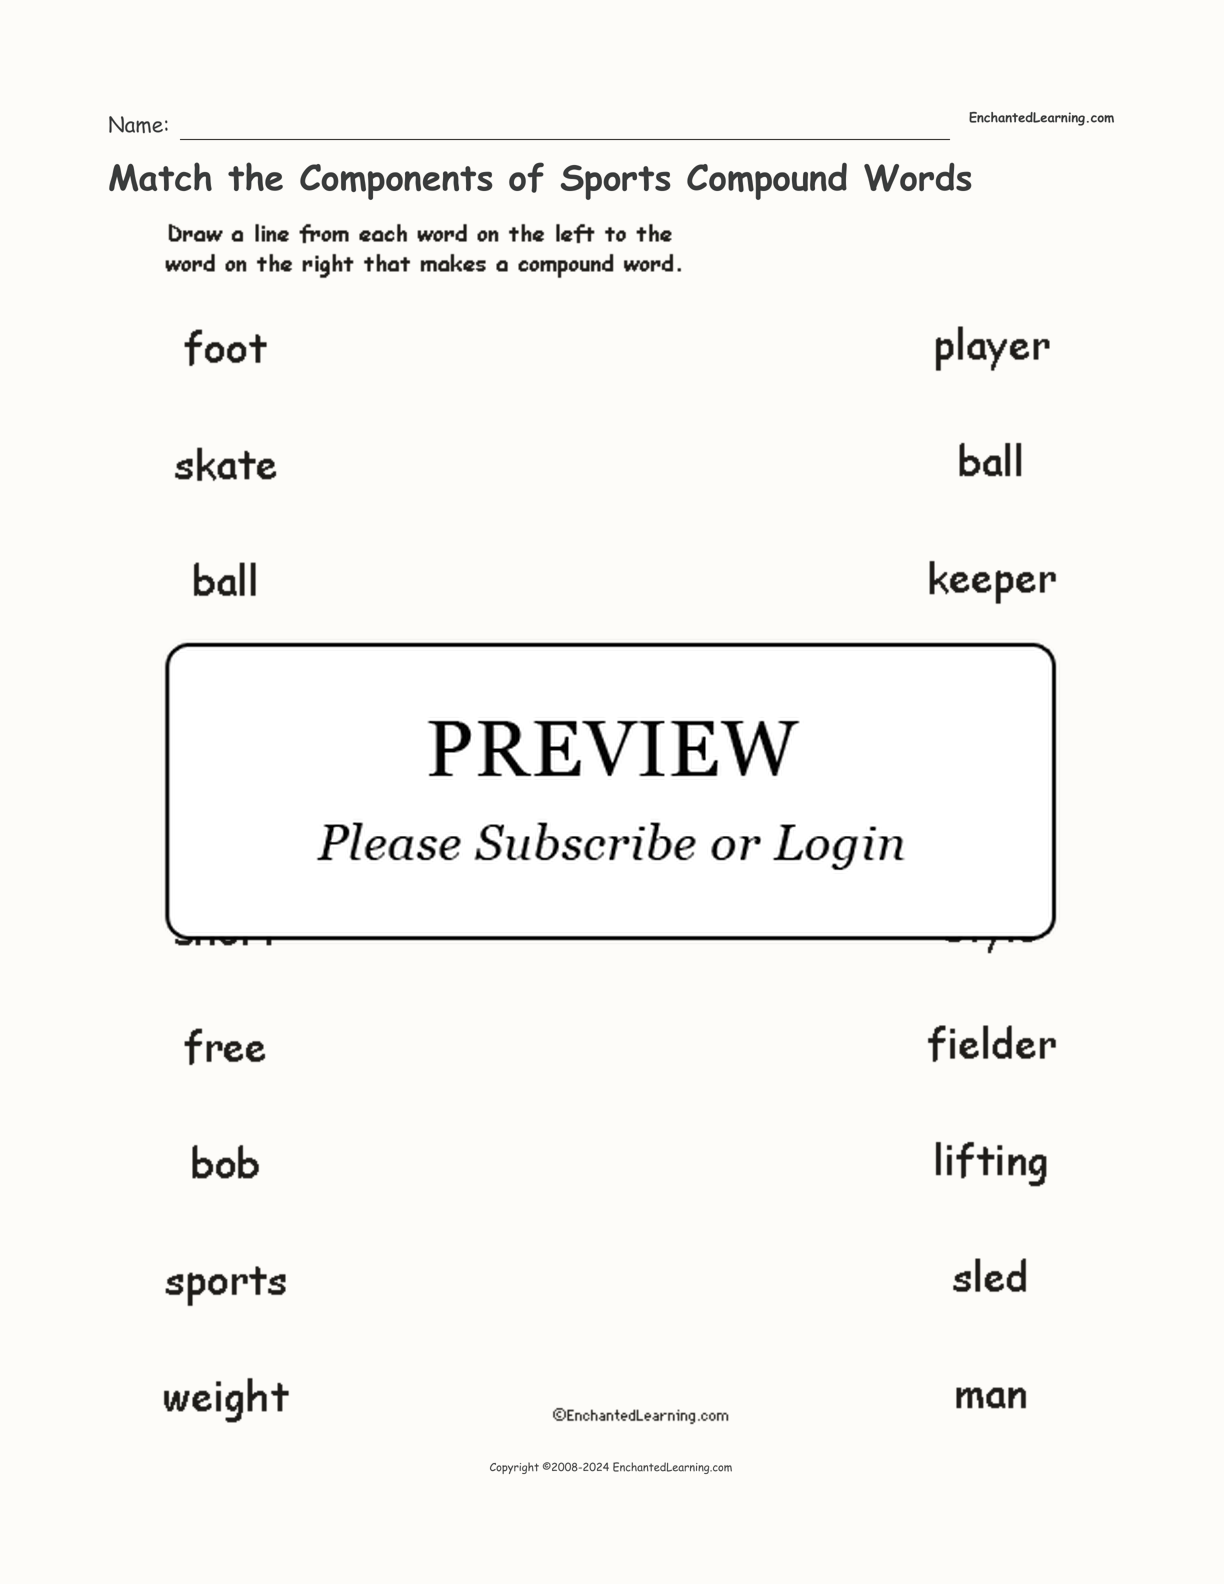 Match the Components of Sports Compound Words interactive worksheet page 1